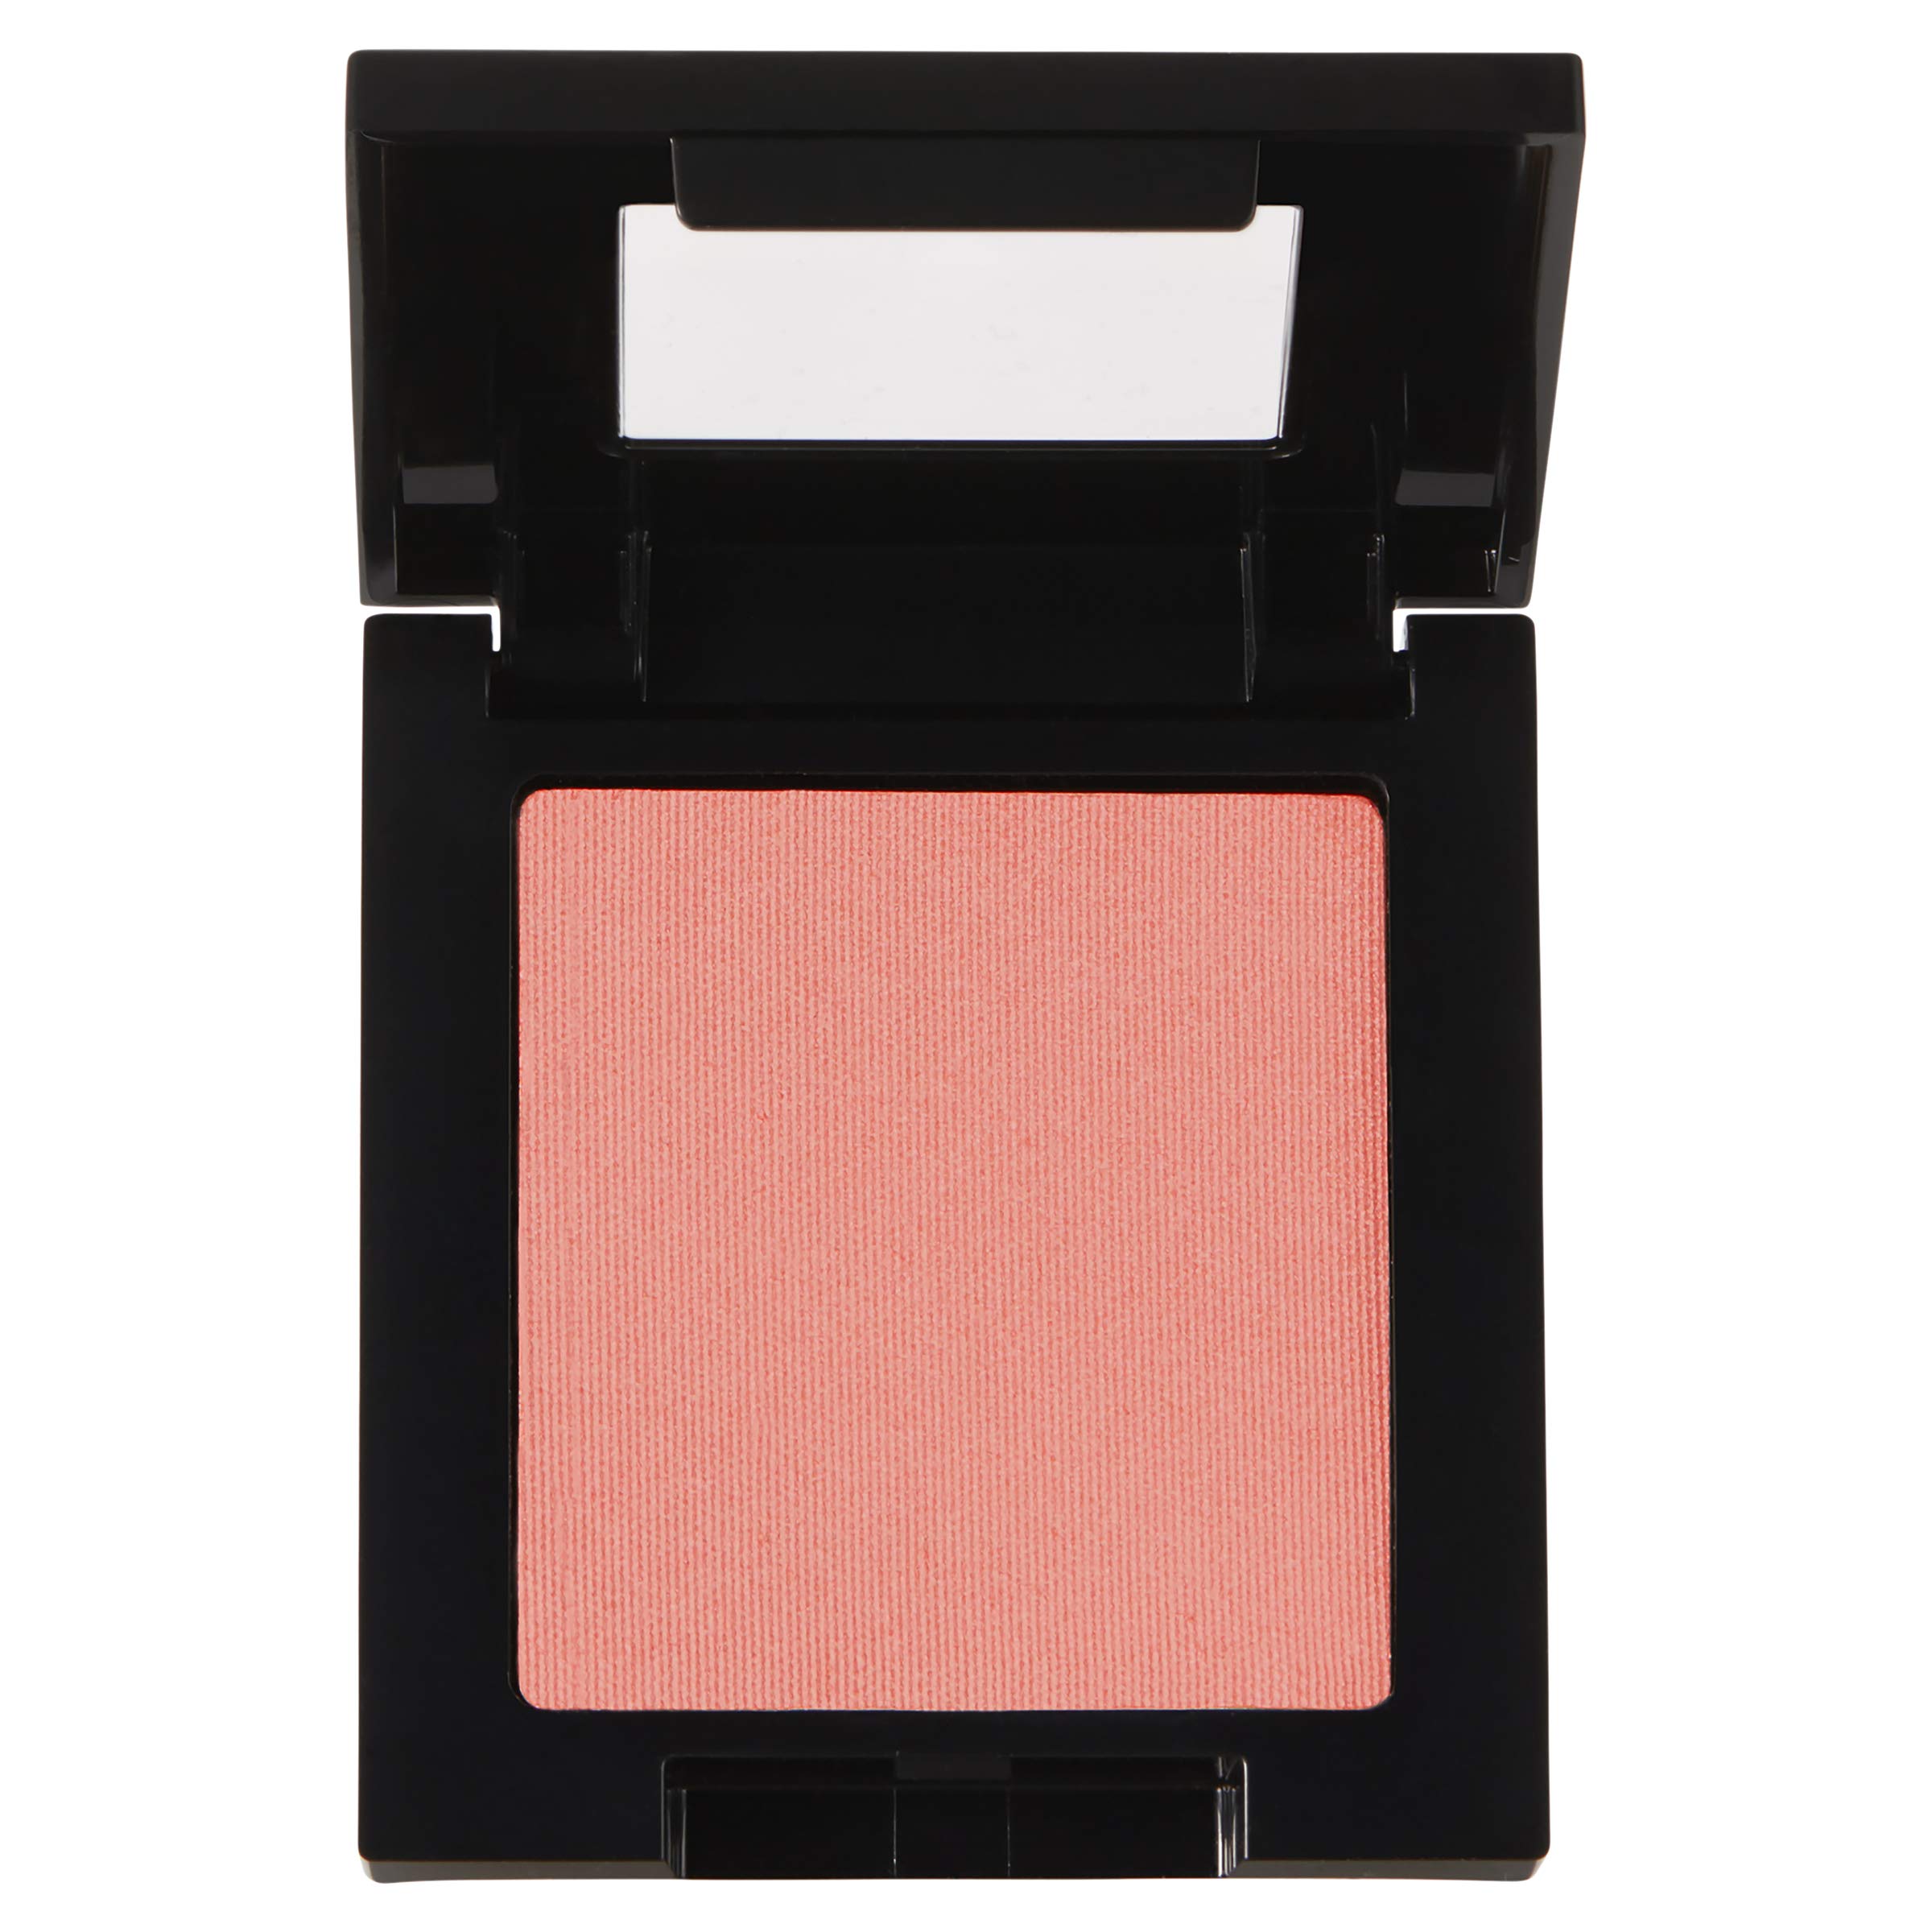 Maybelline Fit Me Blush, Lightweight, Smooth, Blendable, Long-lasting All-Day Face Enhancing Makeup Color, Pink, 1 Count